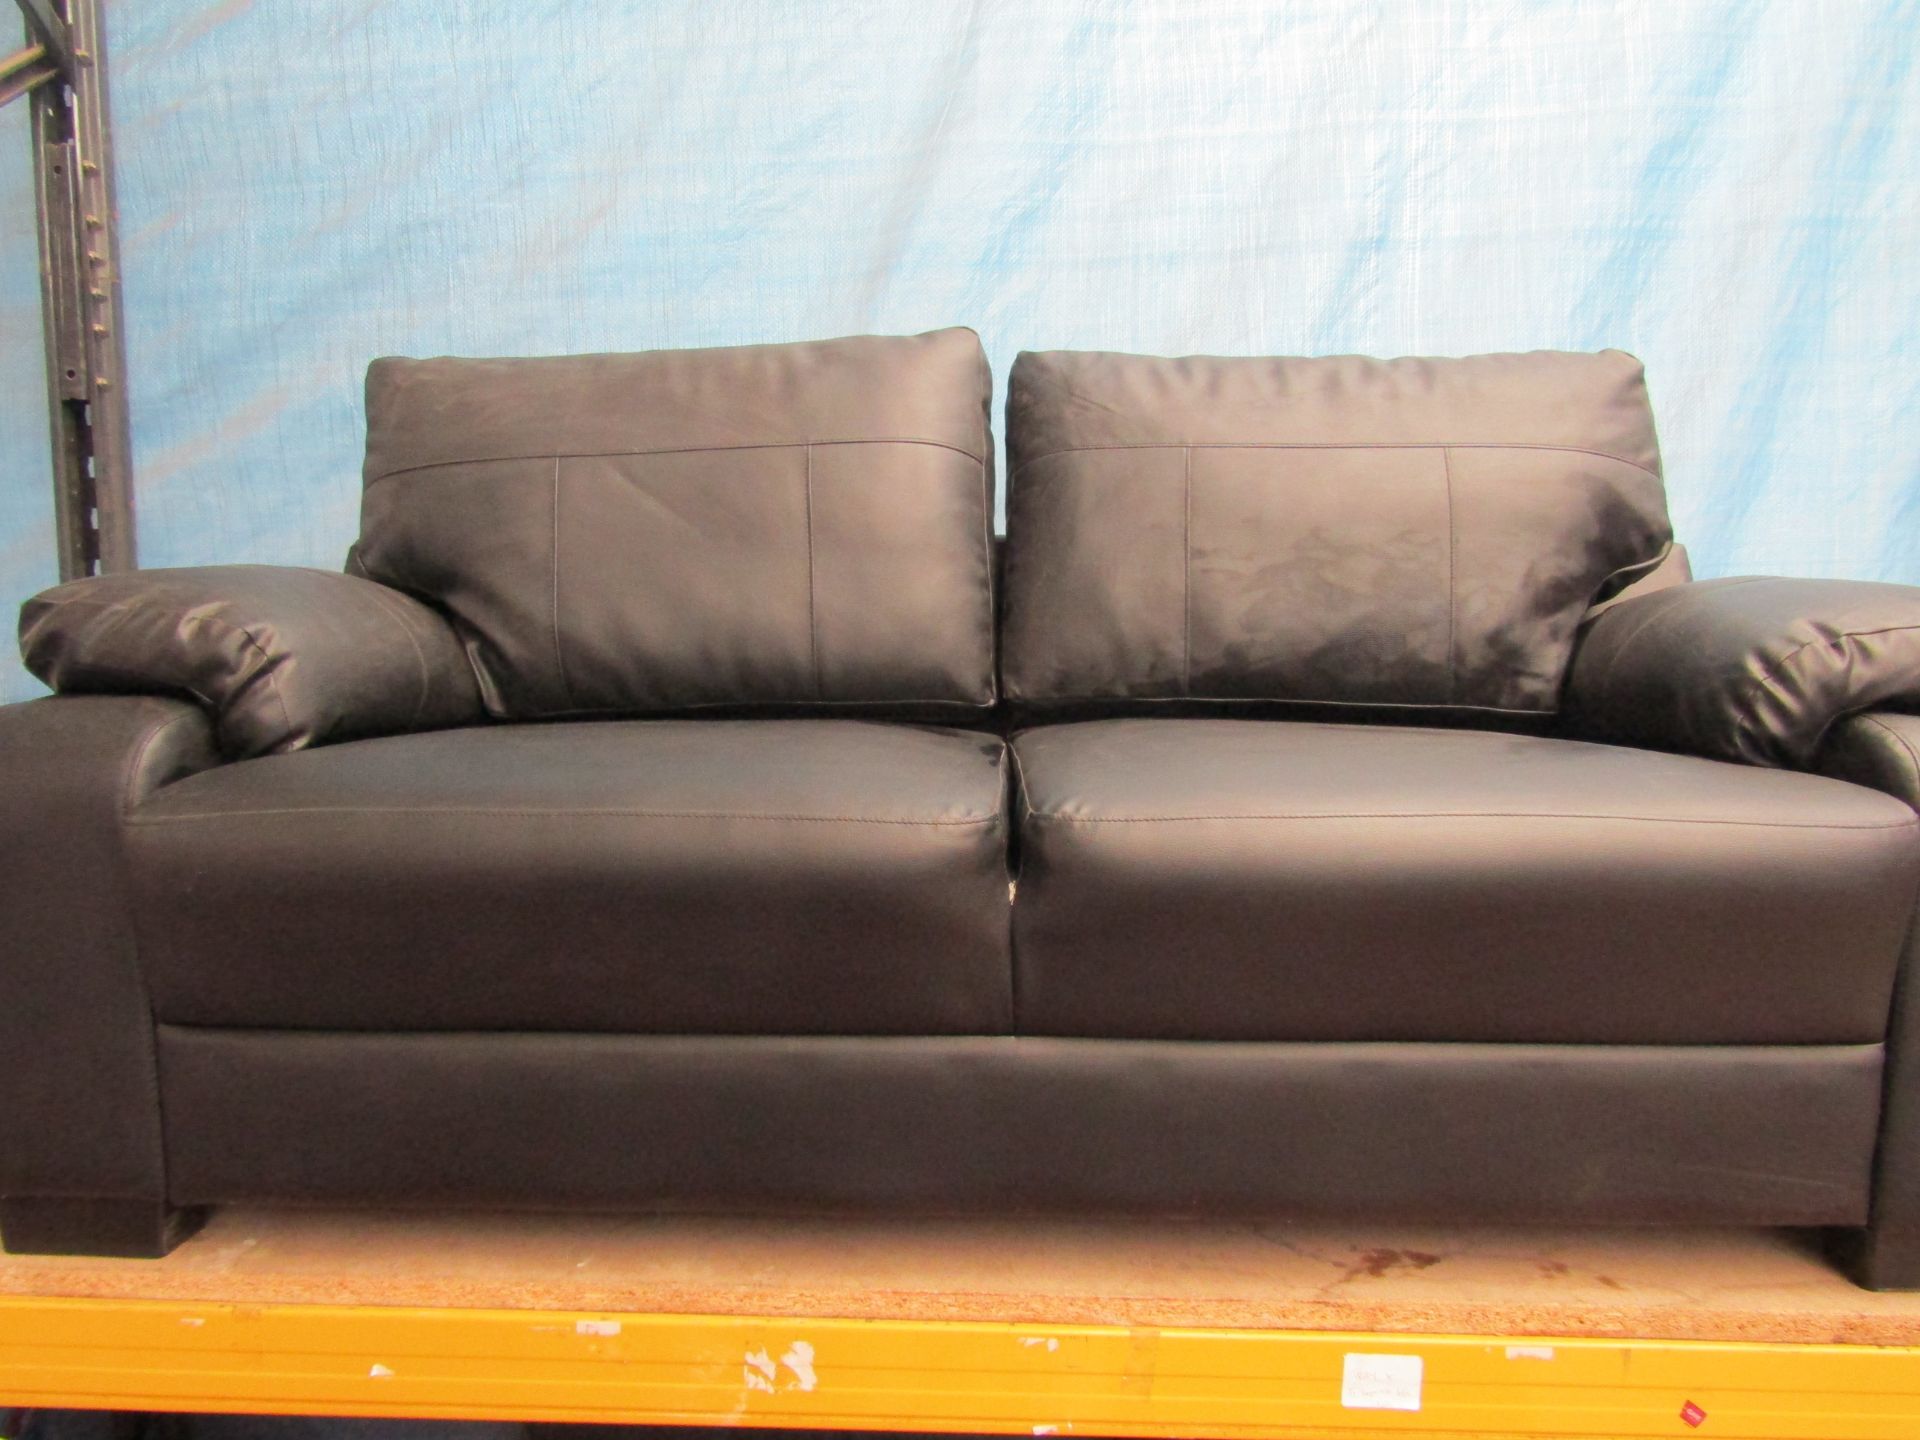 3 Seater Black Faux Leather Sofa.  Dimensions: H 86, W 183, D 82 cm (approx.) Fixed foam-filled seat